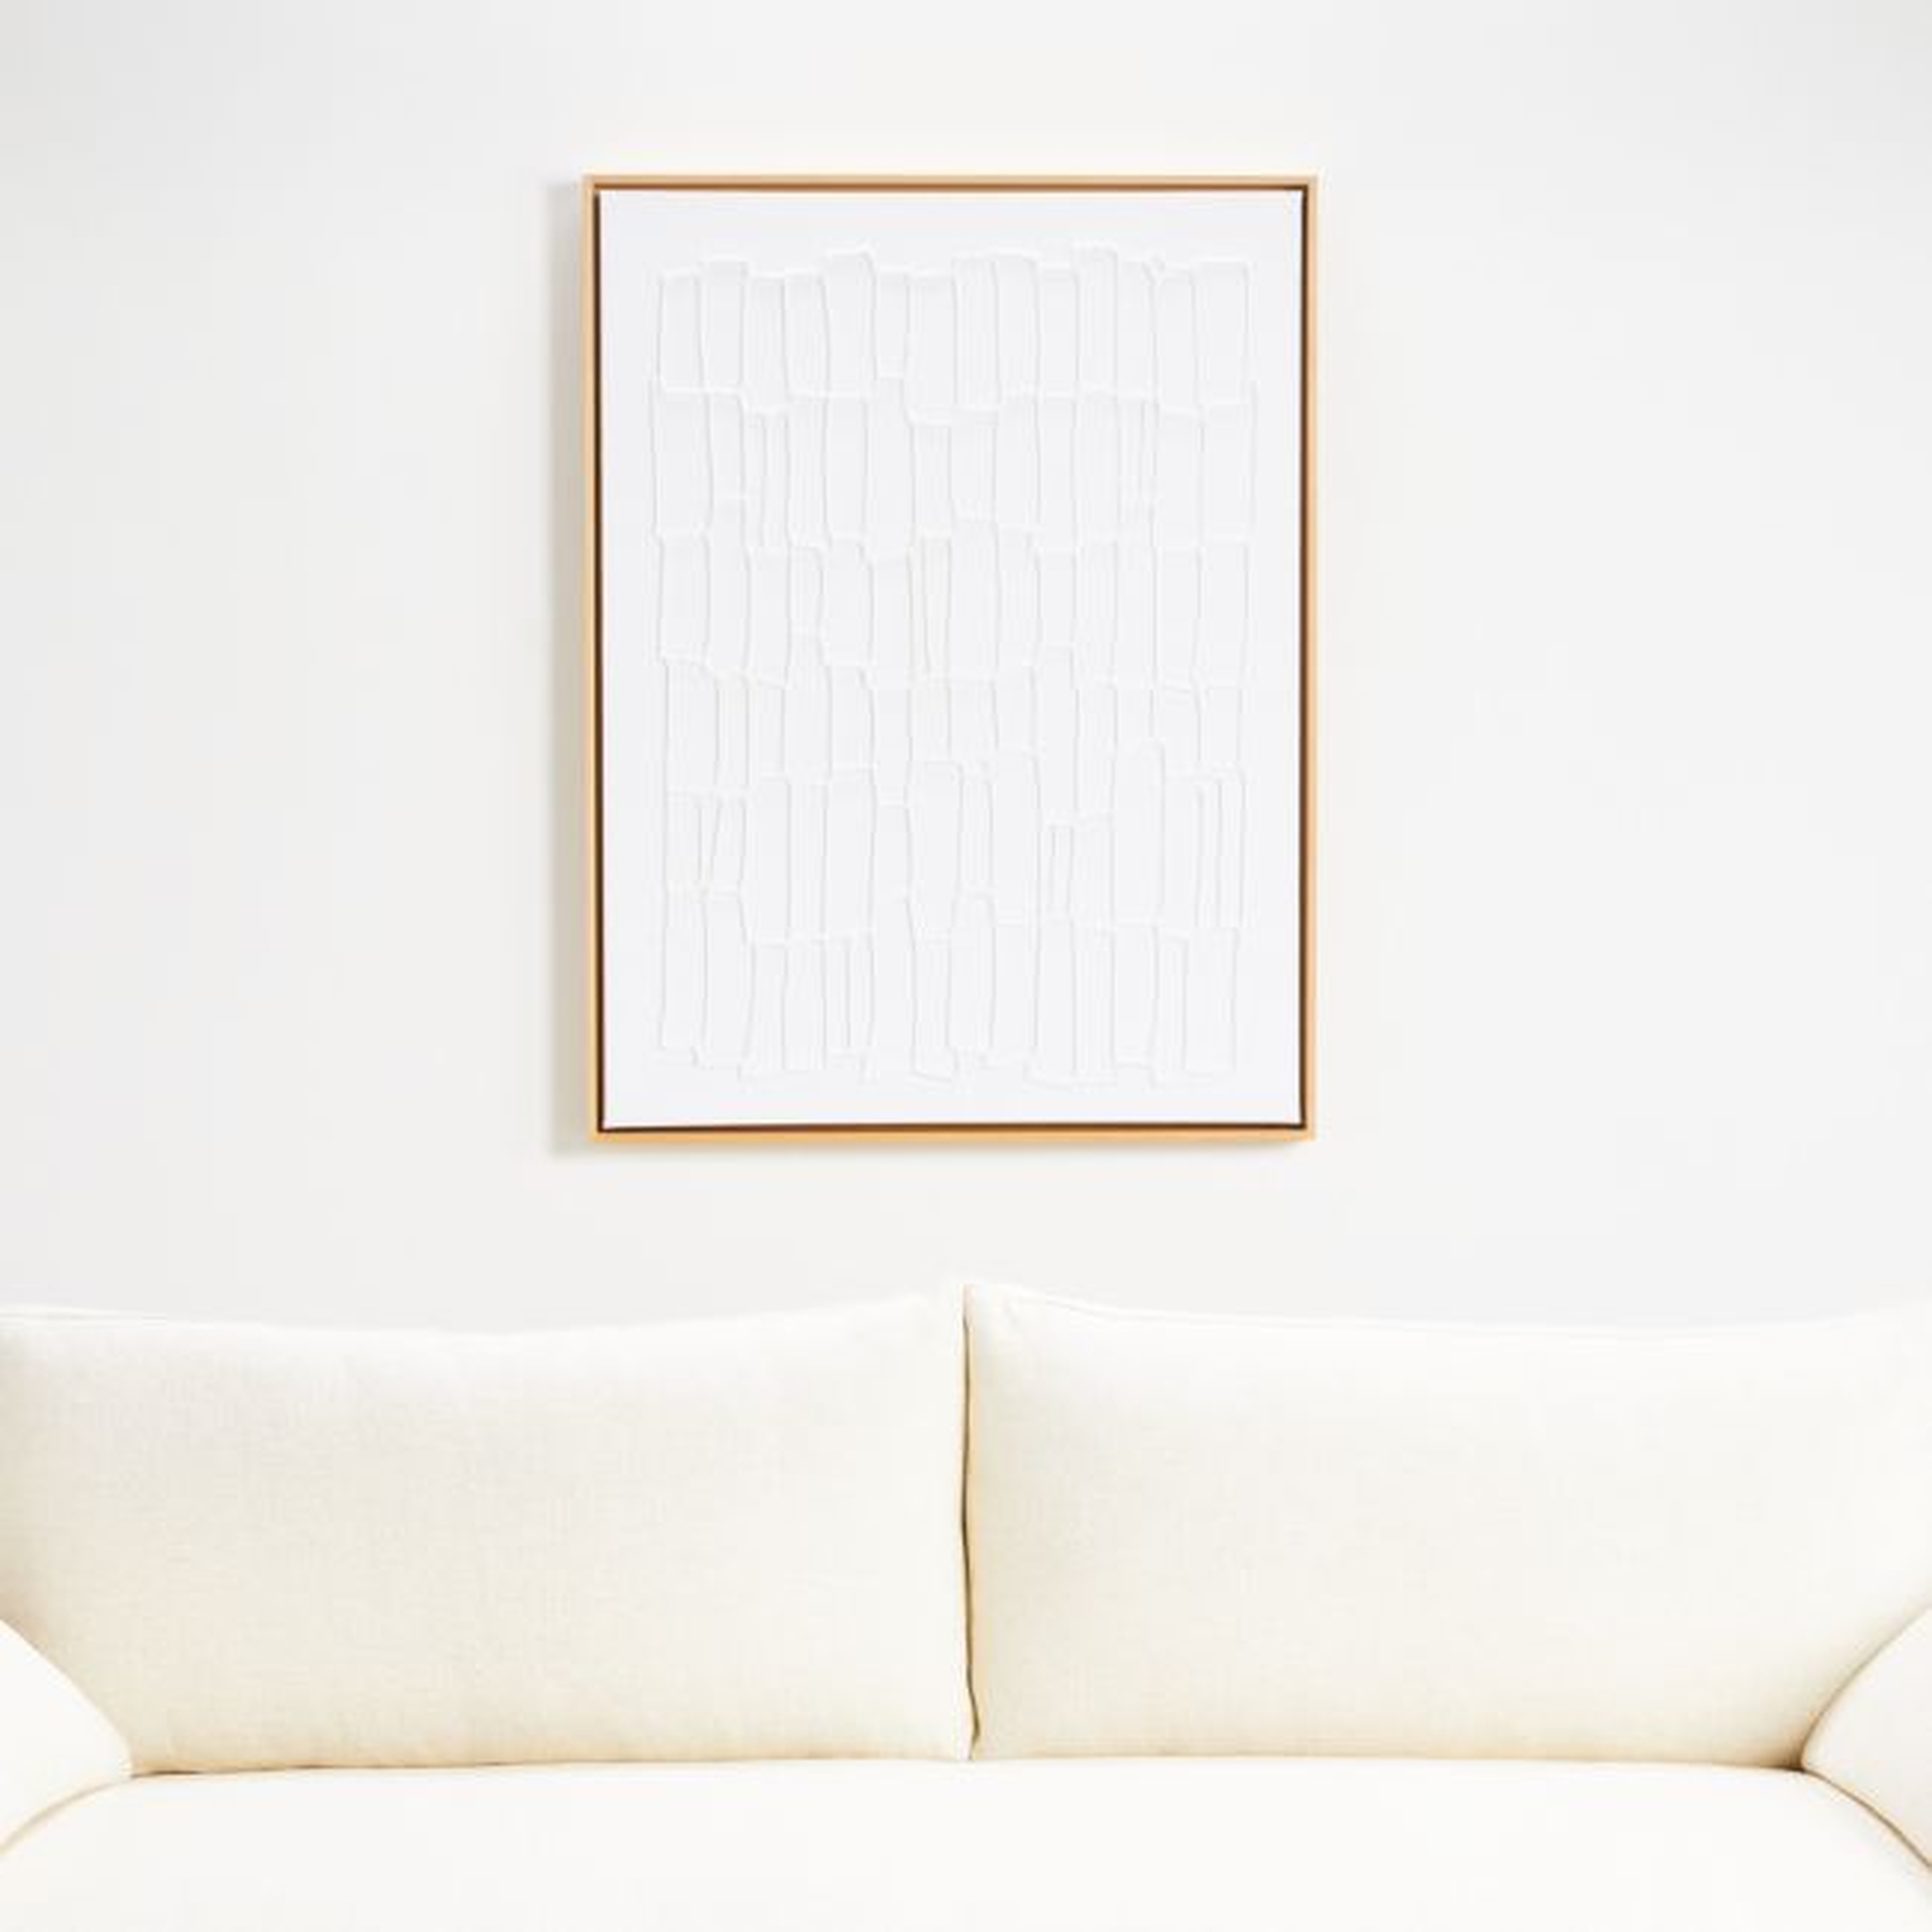 "Contour" Framed Hand-Painted Acrylic Canvas Wall Art 30"x40" by Beverly Fuller - Crate and Barrel